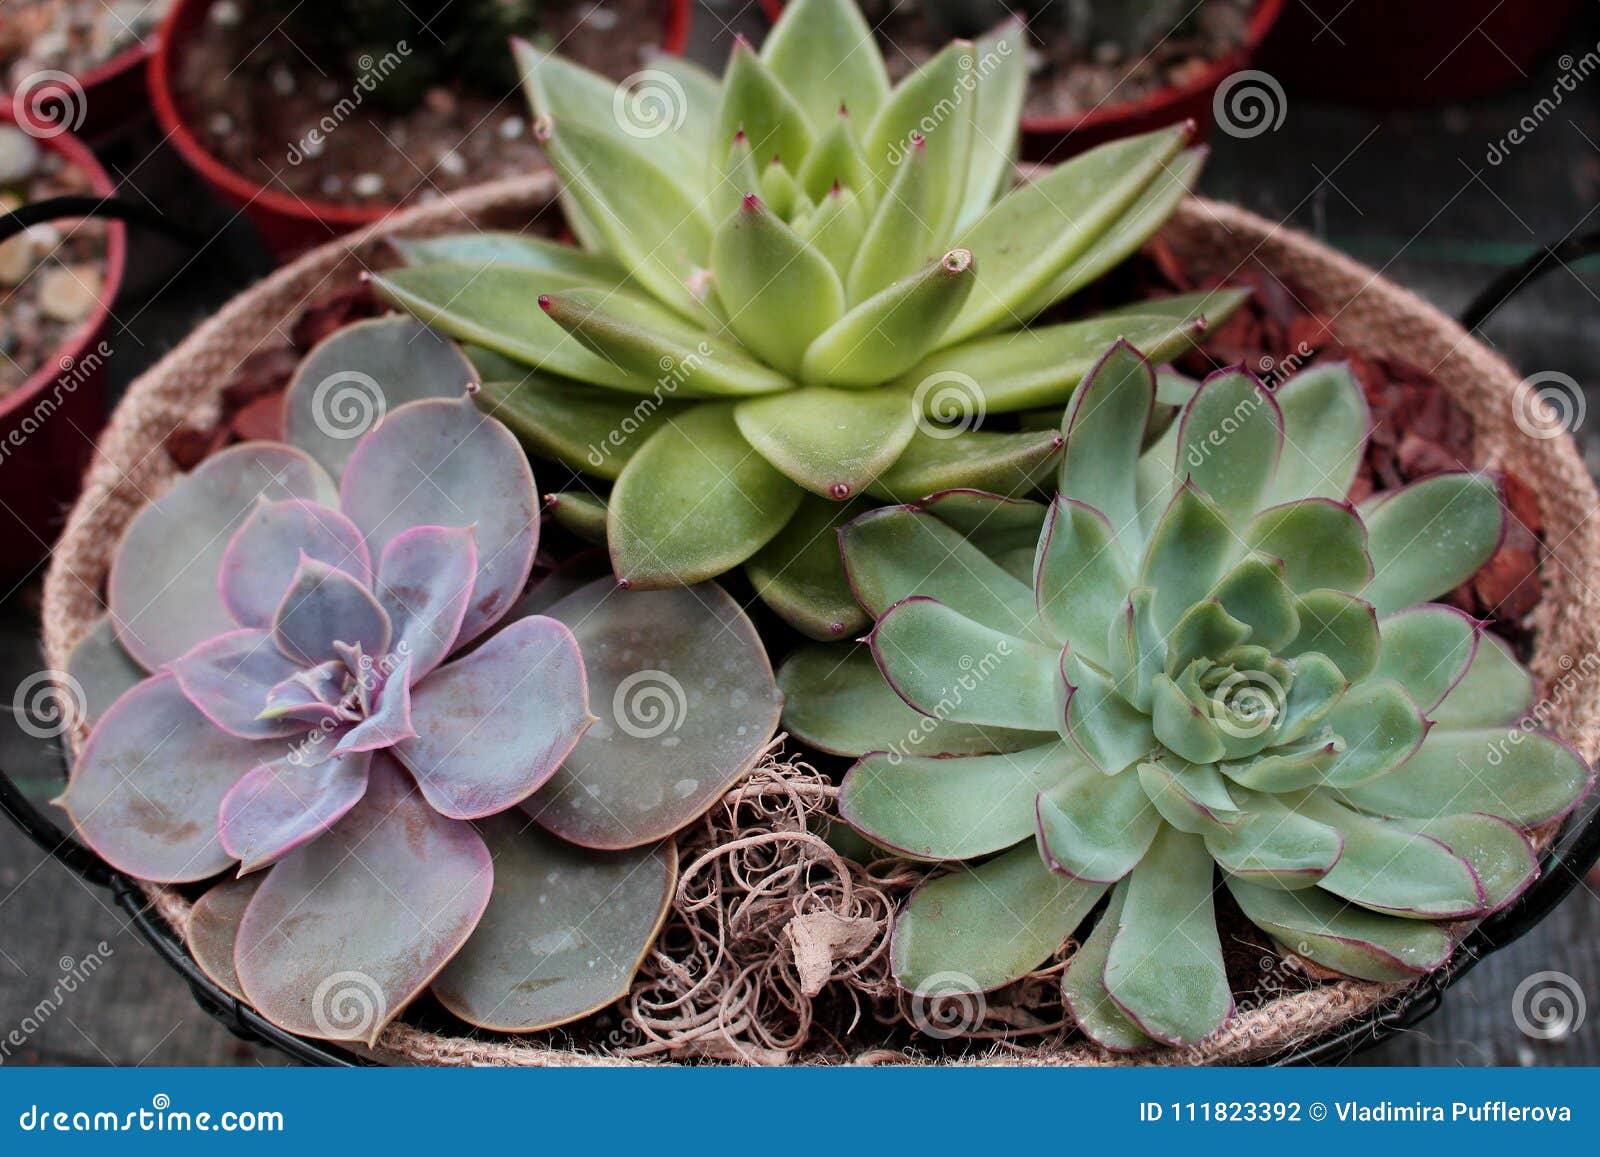 three various succulents in a flower pot - favourite ornamental plant